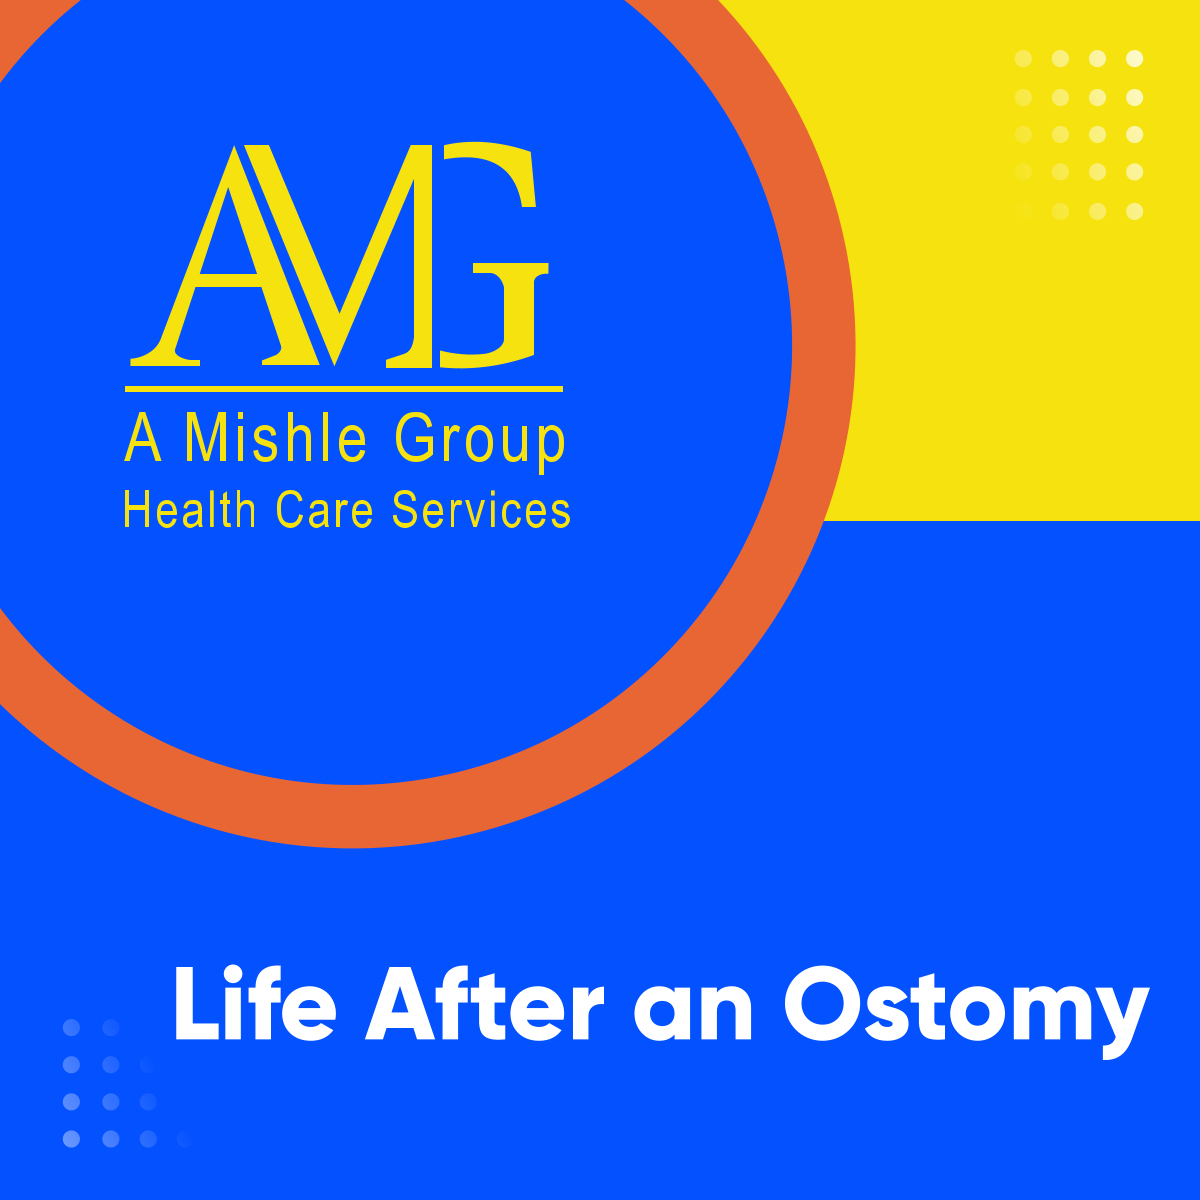 It is possible to live a complete and active life despite the challenges that come with having an ostomy. AMG A Mishle Group Health Care Services provides ostomy care to help you live the life you desire.

Get in touch with us today!

#OstomyCare #HomeCare #BloomingdaleIL